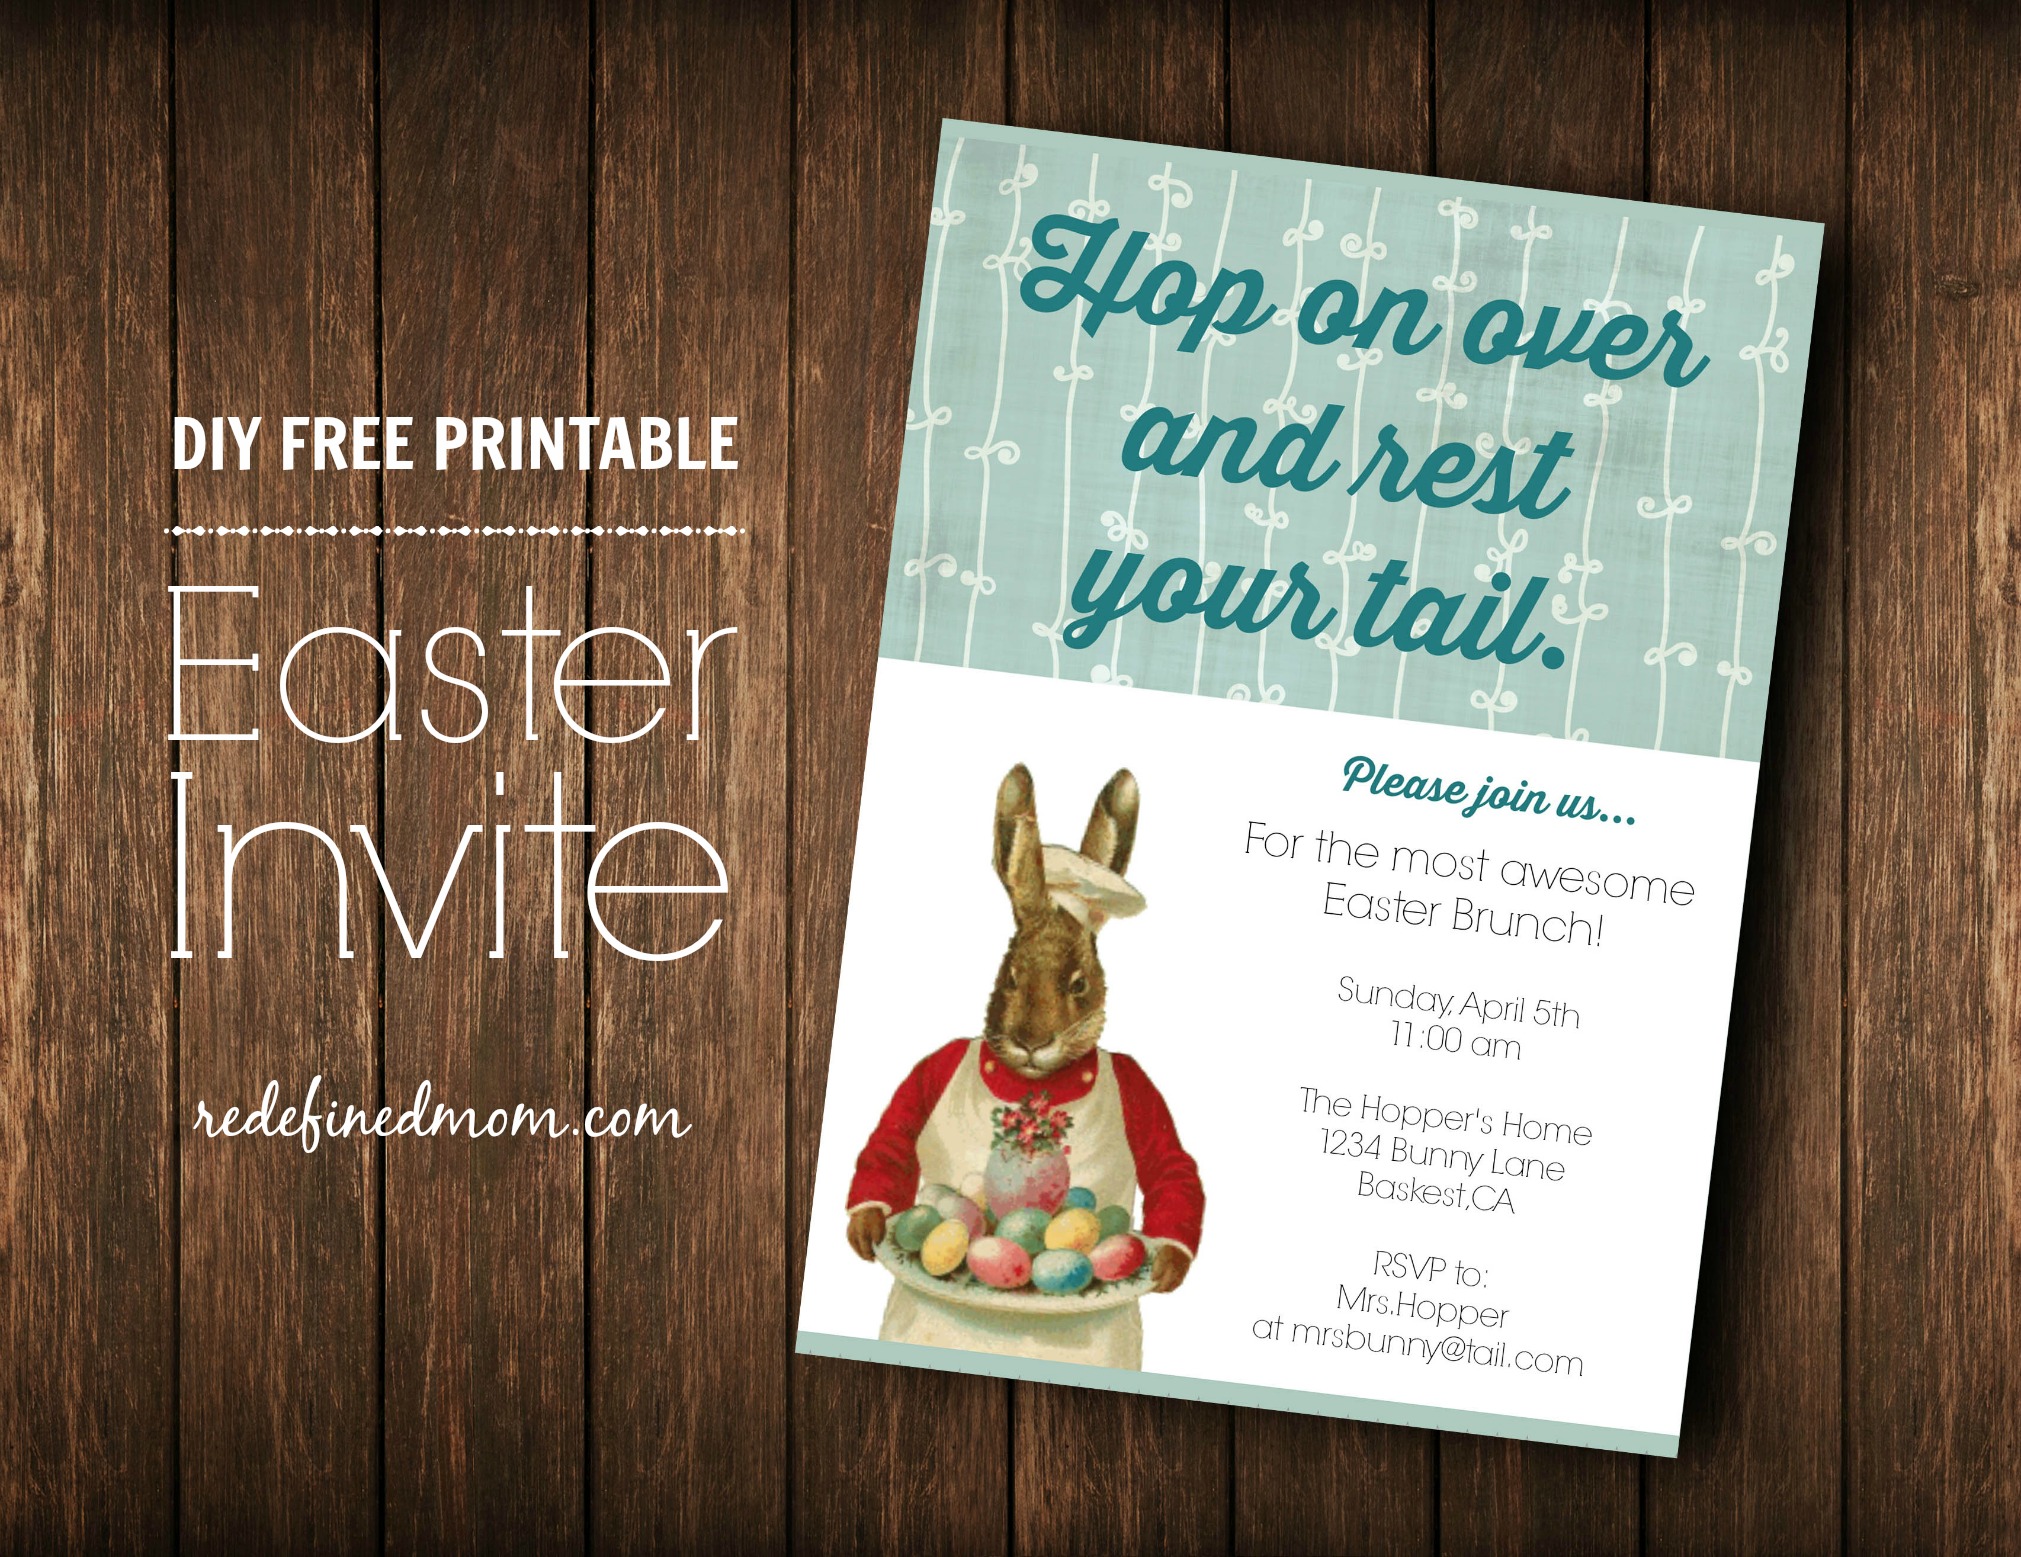 With this clever DIY Printable Easter Brunch Invite you are guaranteed to have a full house on Easter Sunday! This invite is perfect for an Easter egg hunt, brunch, lunch or dinner.  Whatever you plan on hosting, your guests will be high-tailing it over once they get your adorable invitation -- so you better get a hop on it!